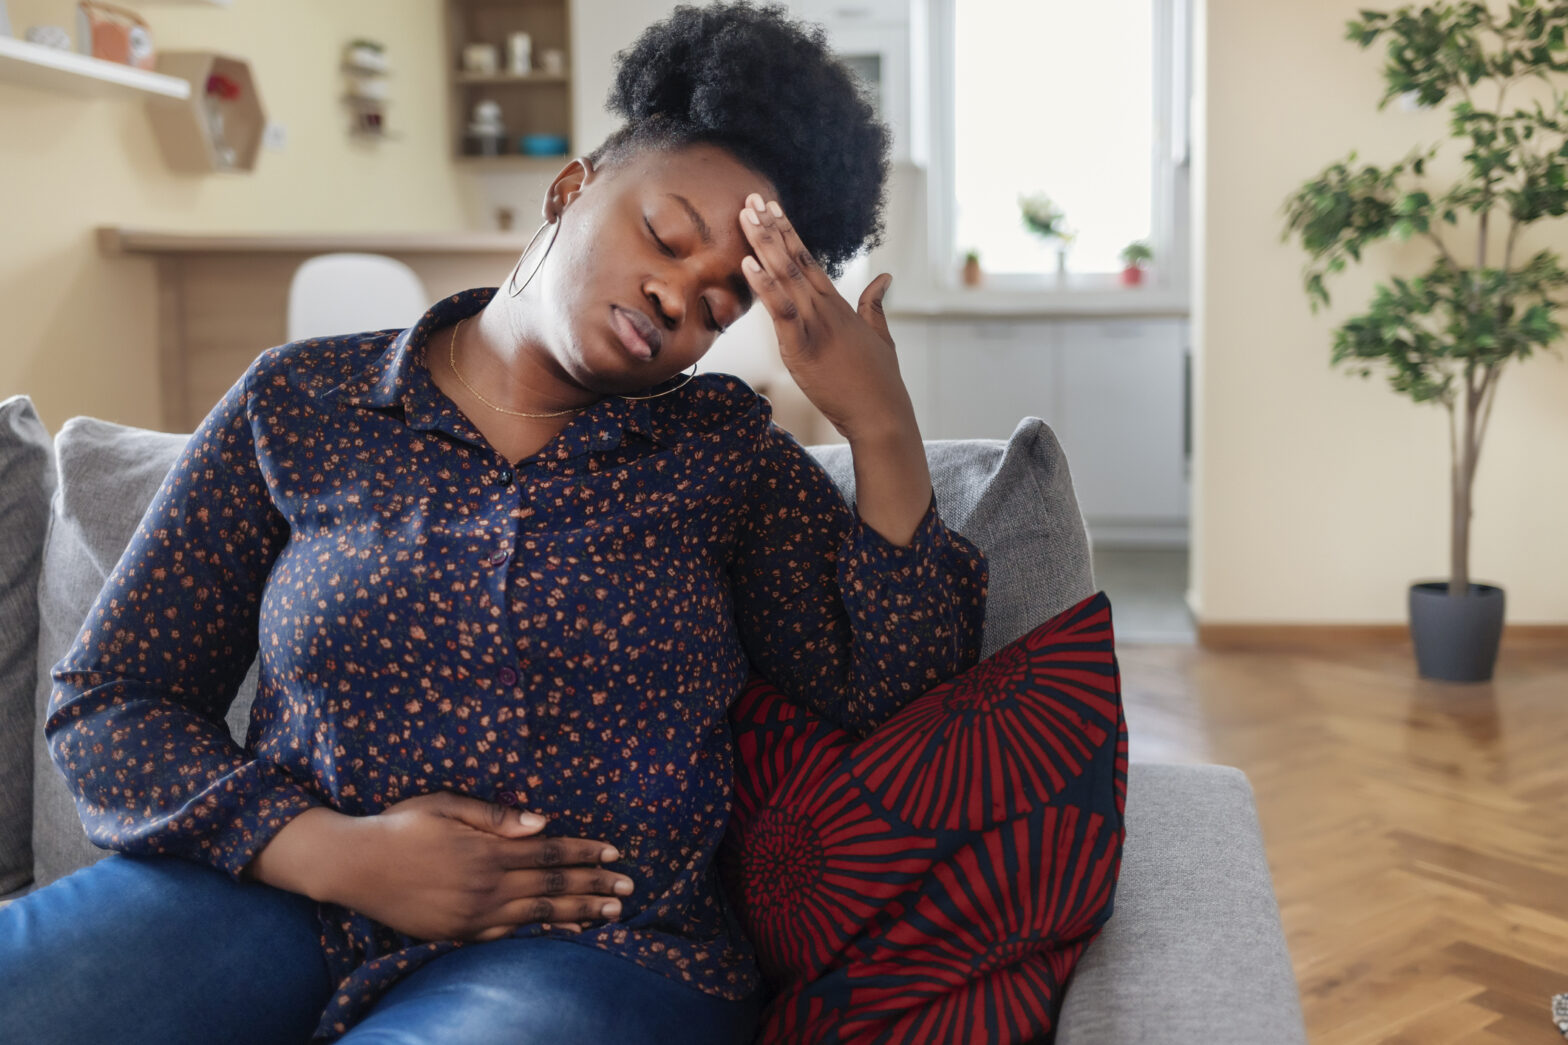 African American Woman Suffering From Strong Abdominal Pain While Sitting on Sofa at Home